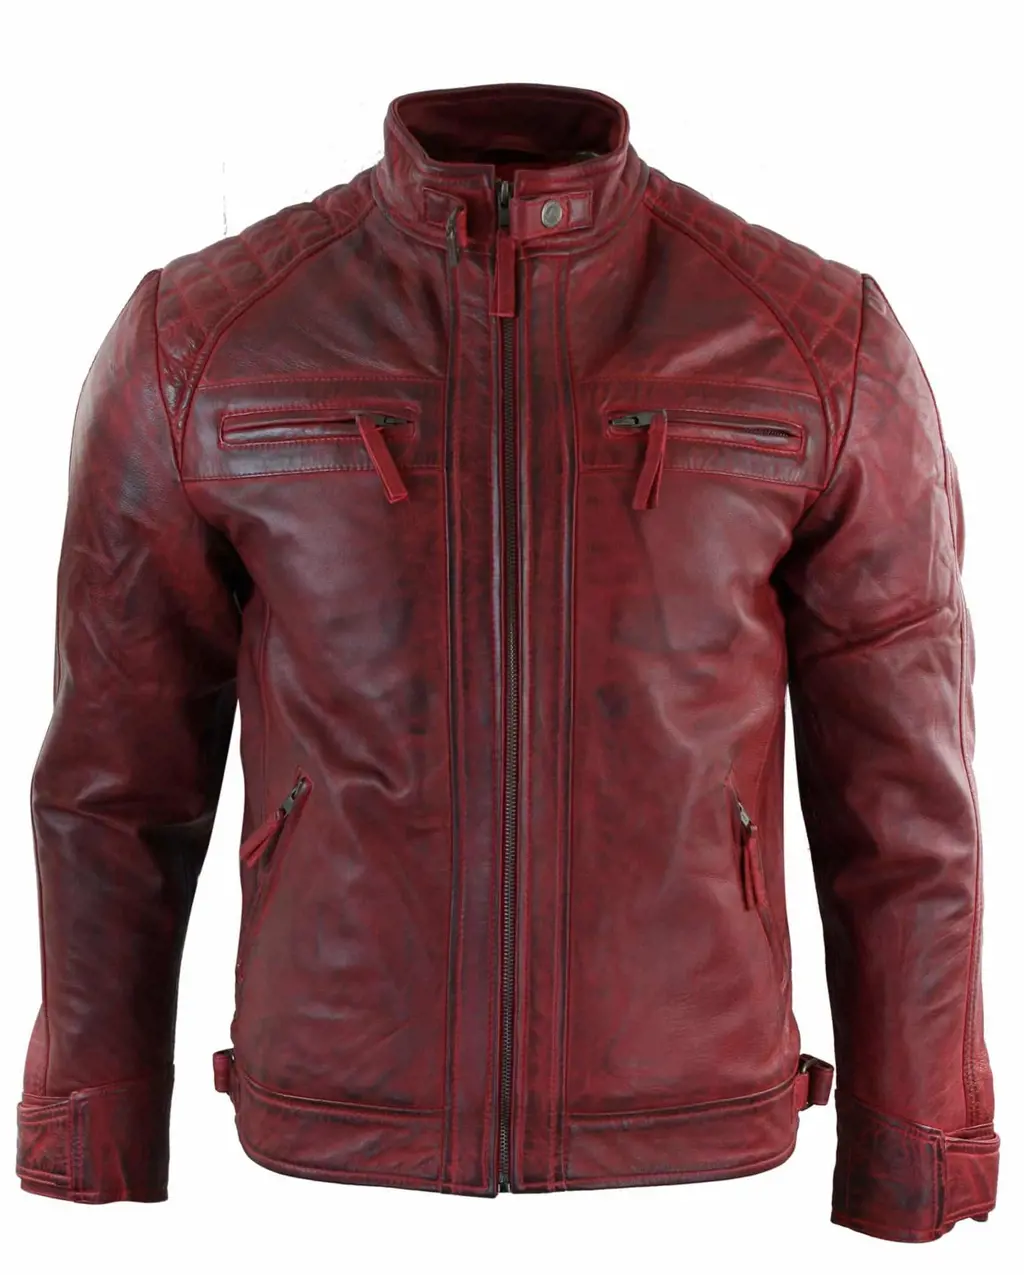 The Best Outfit Combinations For Men's Red Leather Jacket | ShunVogue